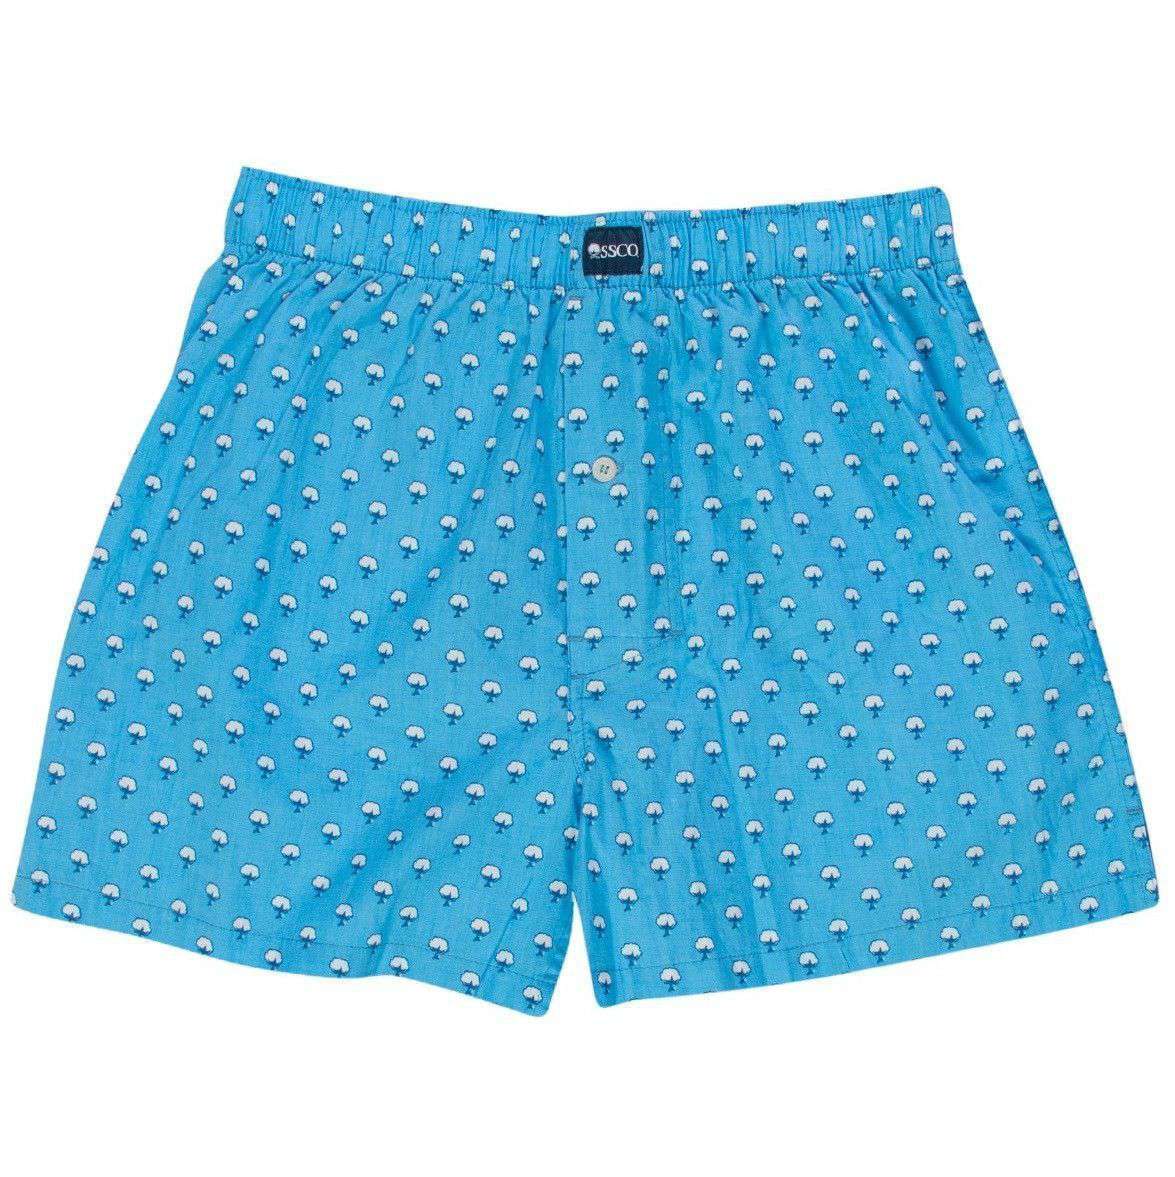 Cotton Club Boxers in Bonnie Blue by The Southern Shirt Co. - Country Club Prep